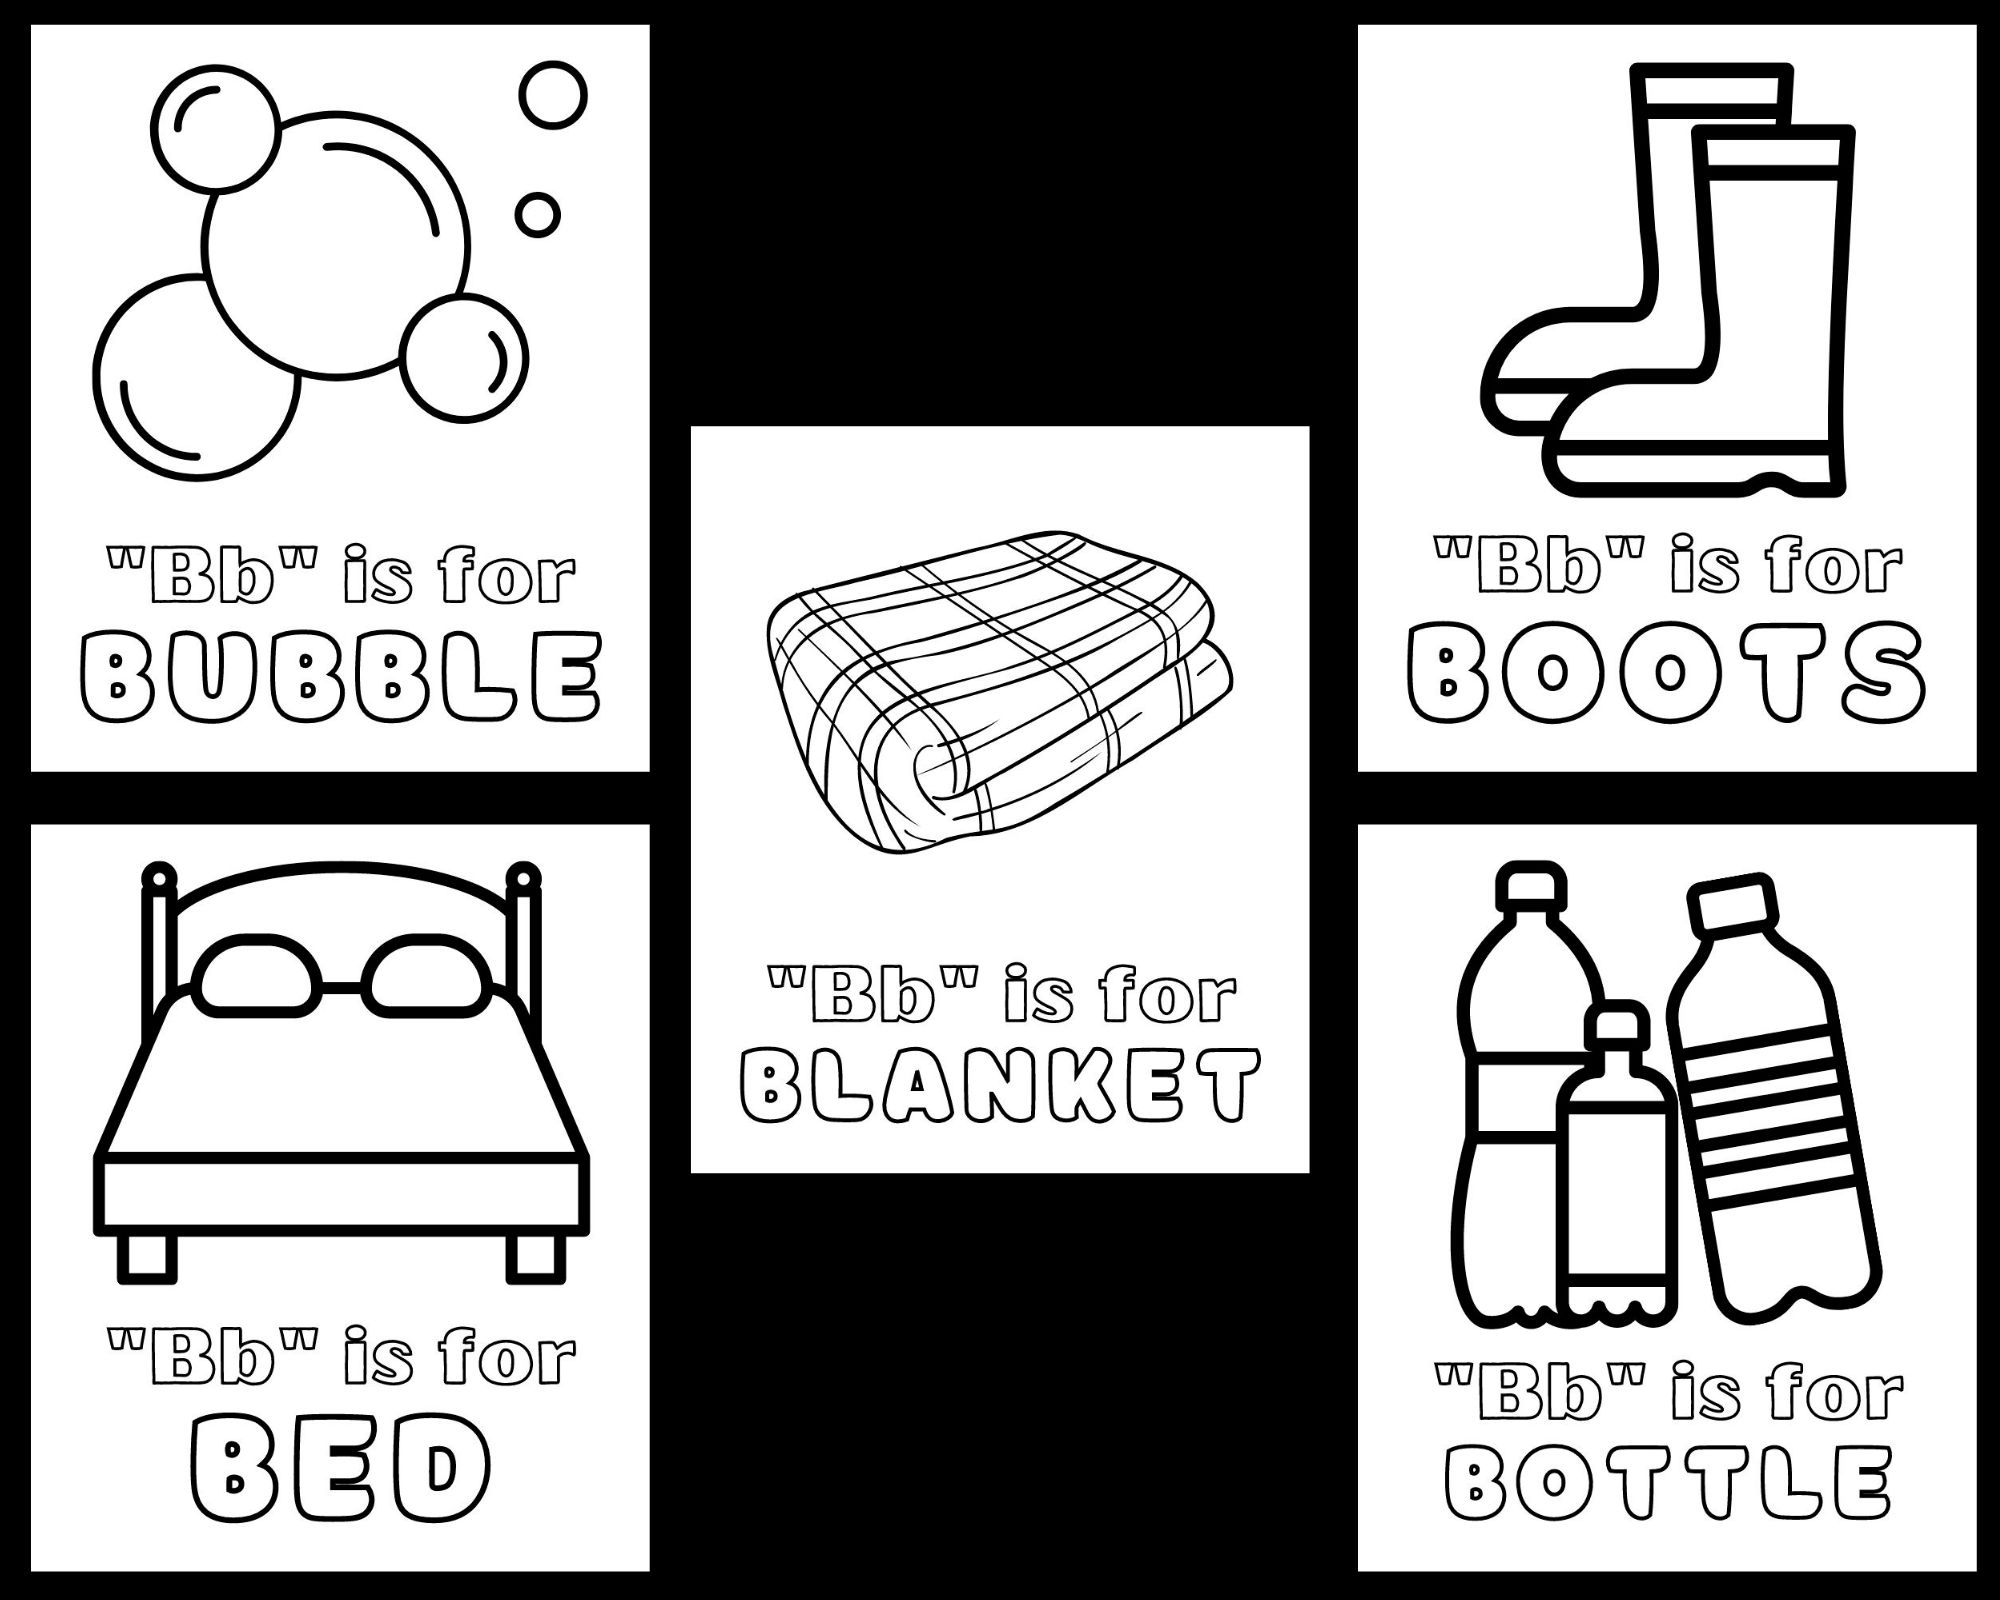 Awesome letter b coloring pages printable pdf for kids